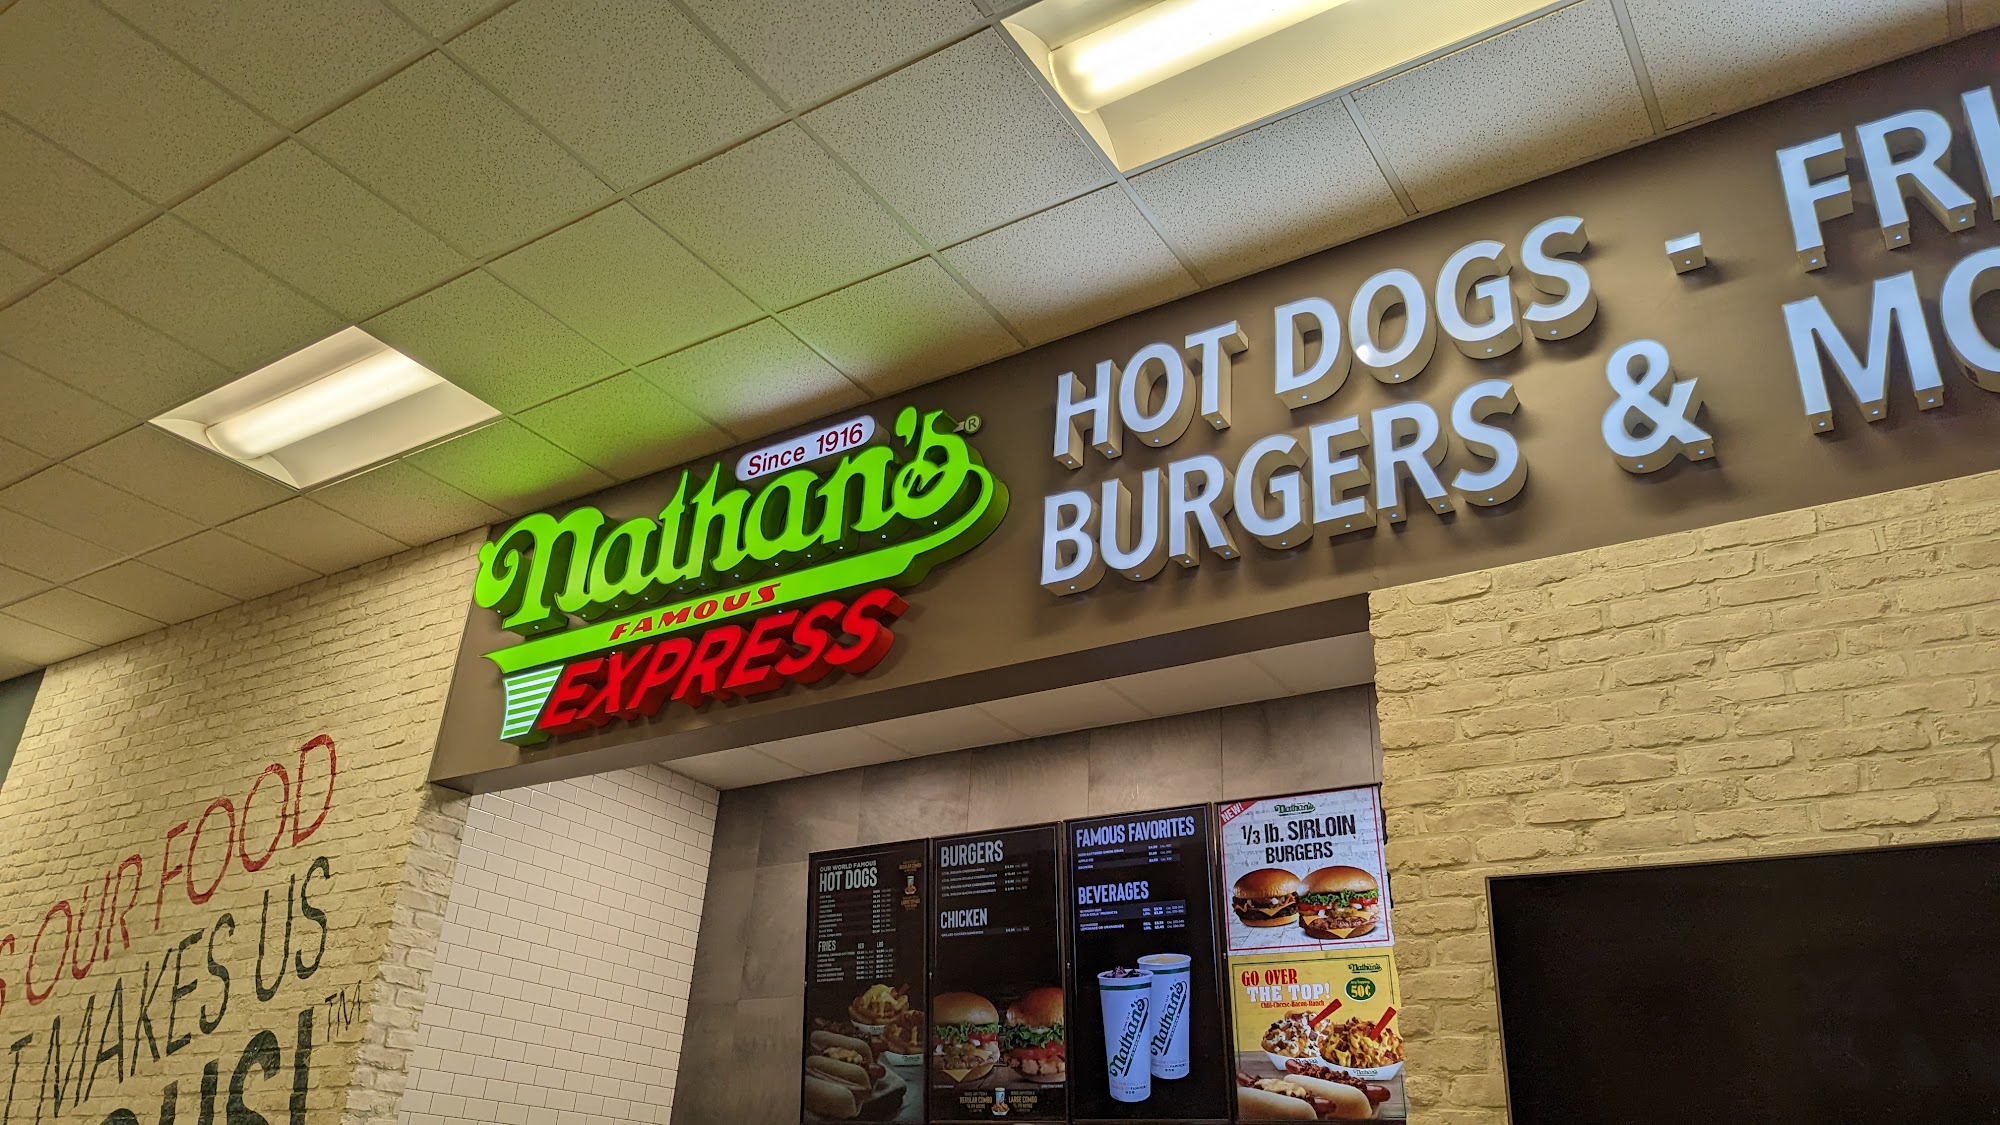 Nathan's Famous Express